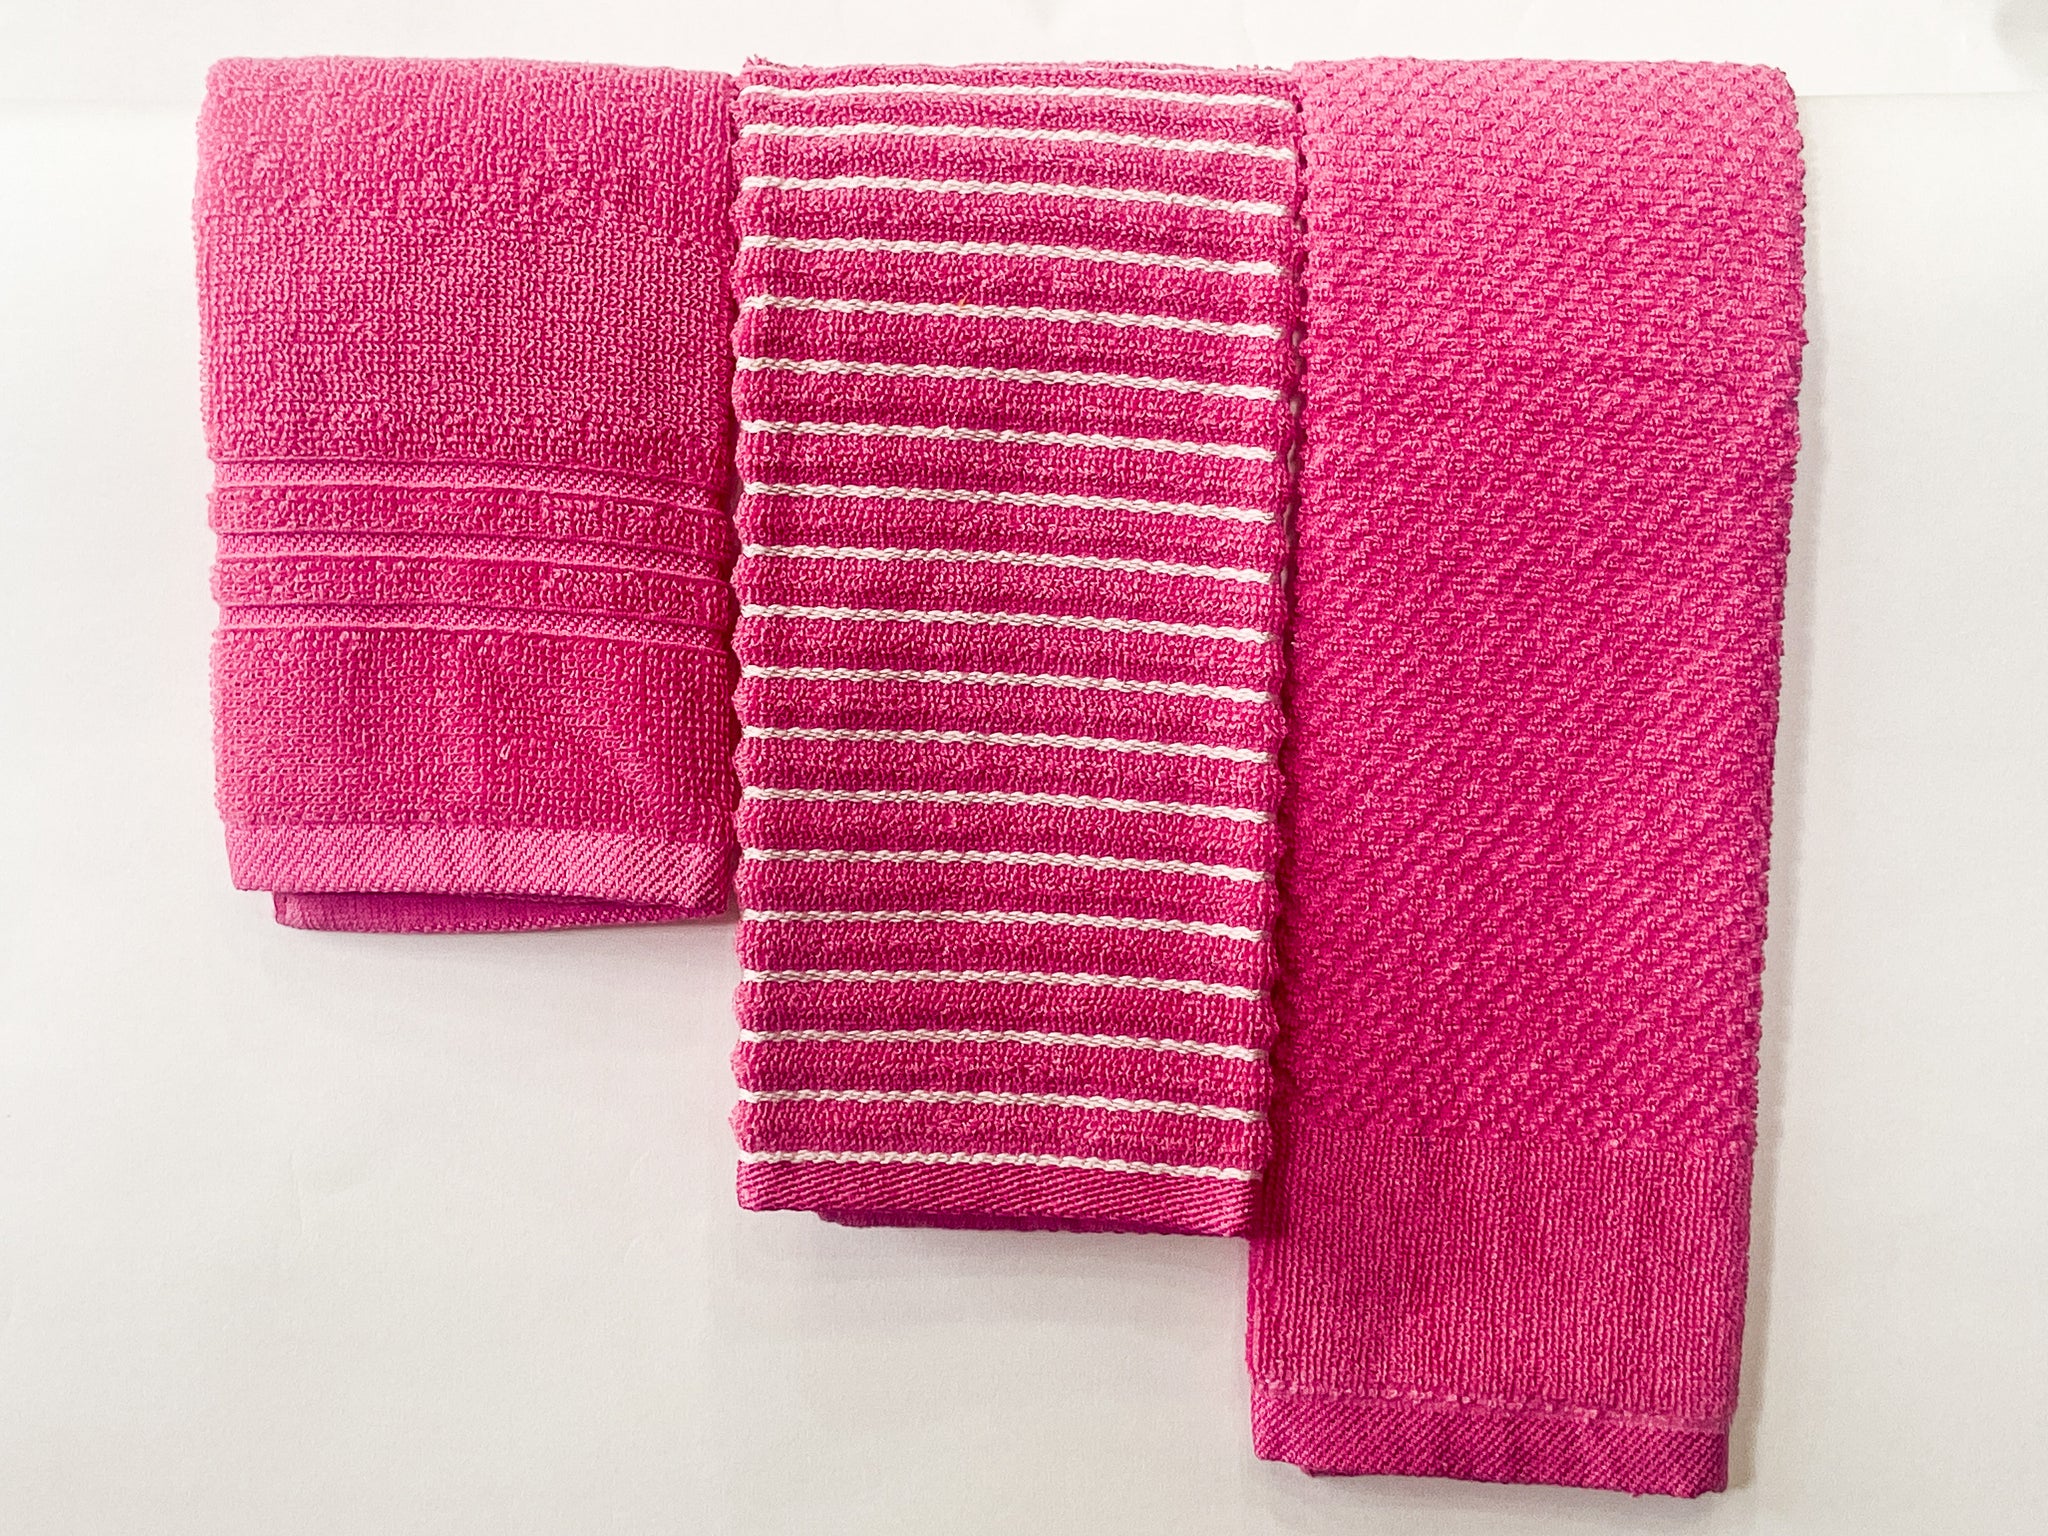 Lushomes Cotton Kitchen Towels, Hand Towel Set of 6, Napkin for Hand Towels  (Pack of 3, 34 x 51 cms, Fuchsia)